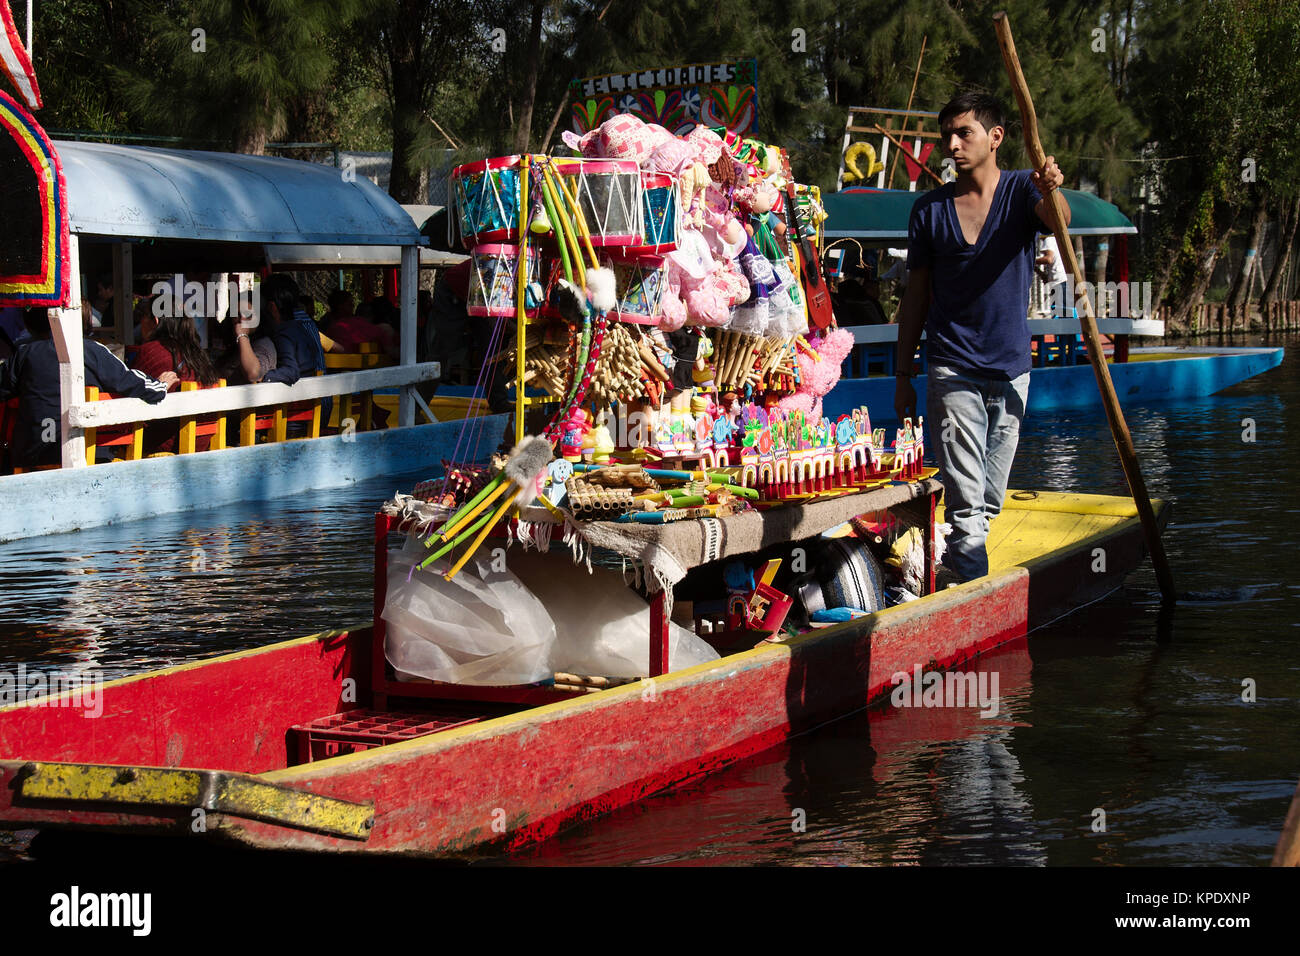 Xochimilco, Mexico City, Mexico - 2017: A man on a trajinera (a local type of boat) sells toys to people in other trajineras on a city canal. Stock Photo